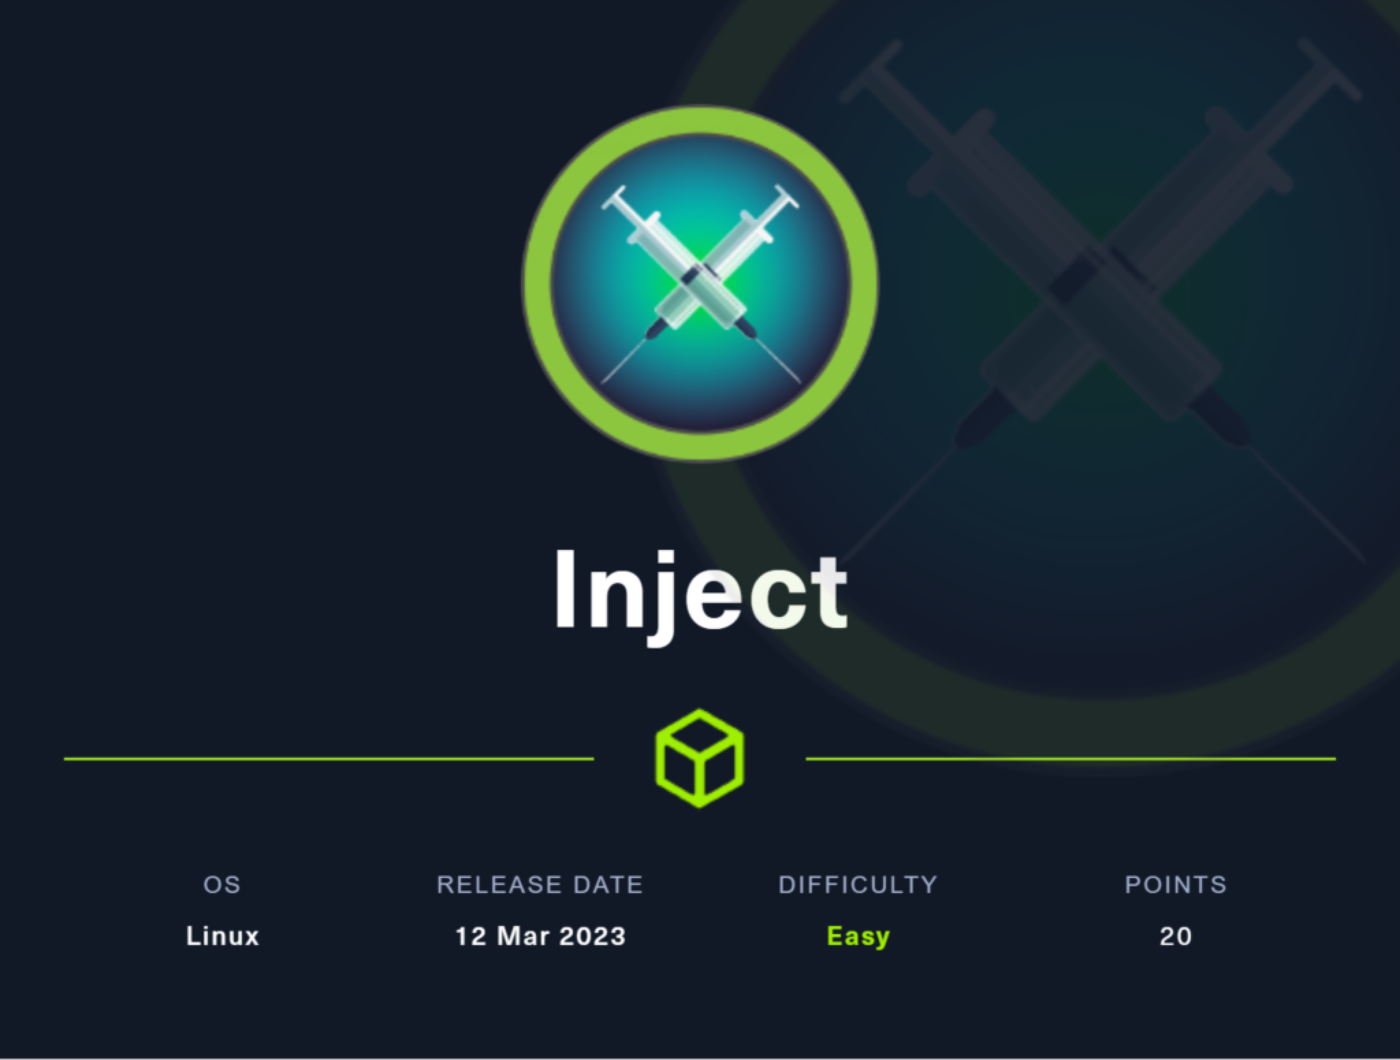 Writeup of Inject from HackTheBox